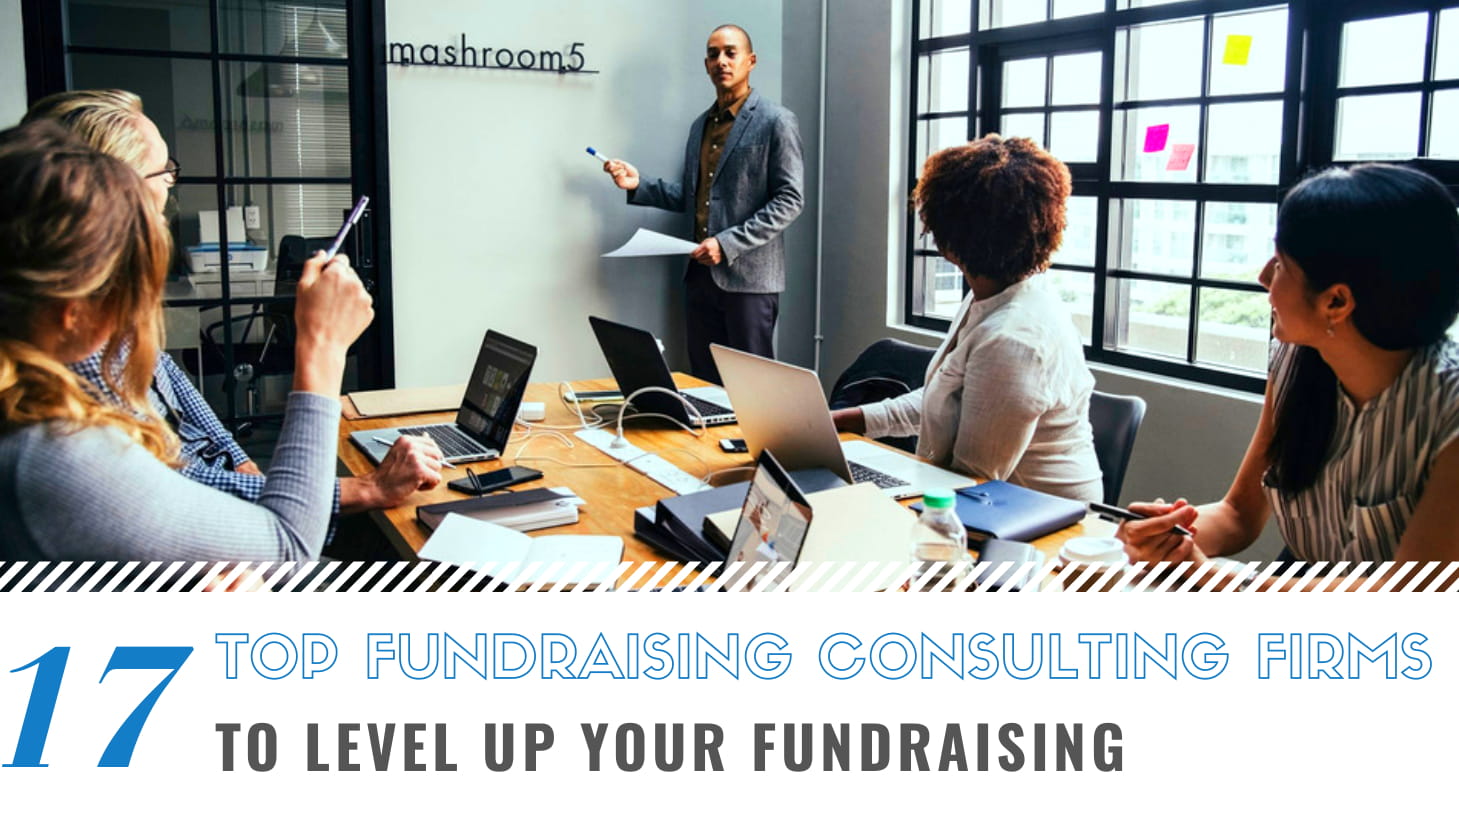 Top 17 Fundraising Consulting Firms to Level Up Your Fundraising